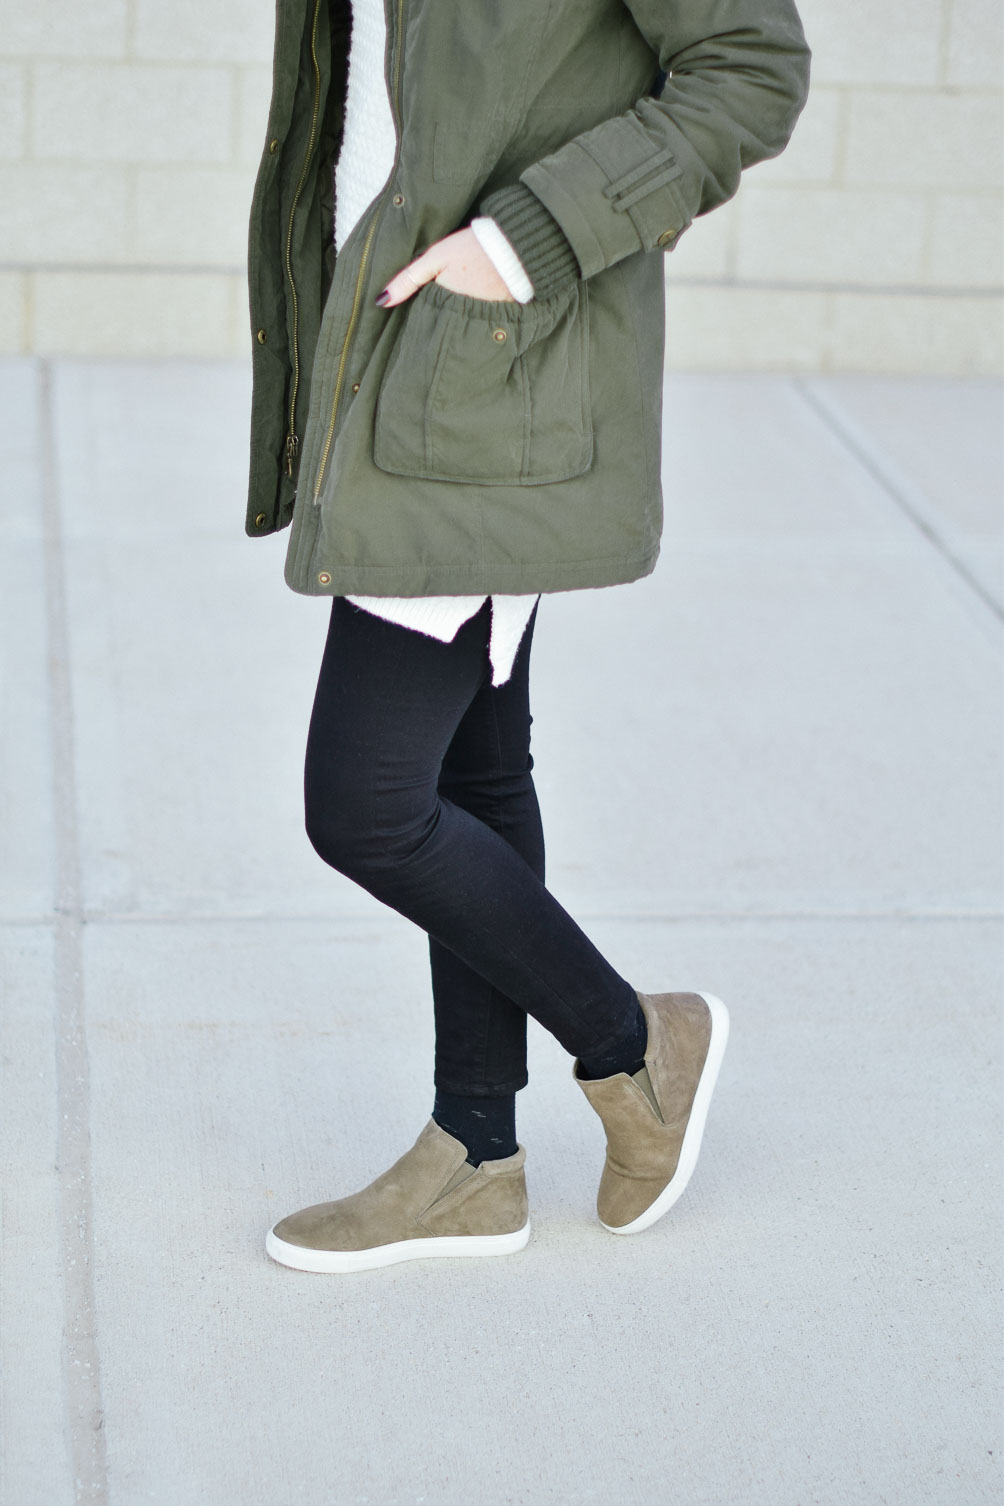 styling a green fur trim parka with this sweater dress over dark skinny jeans and olive suede sneakers